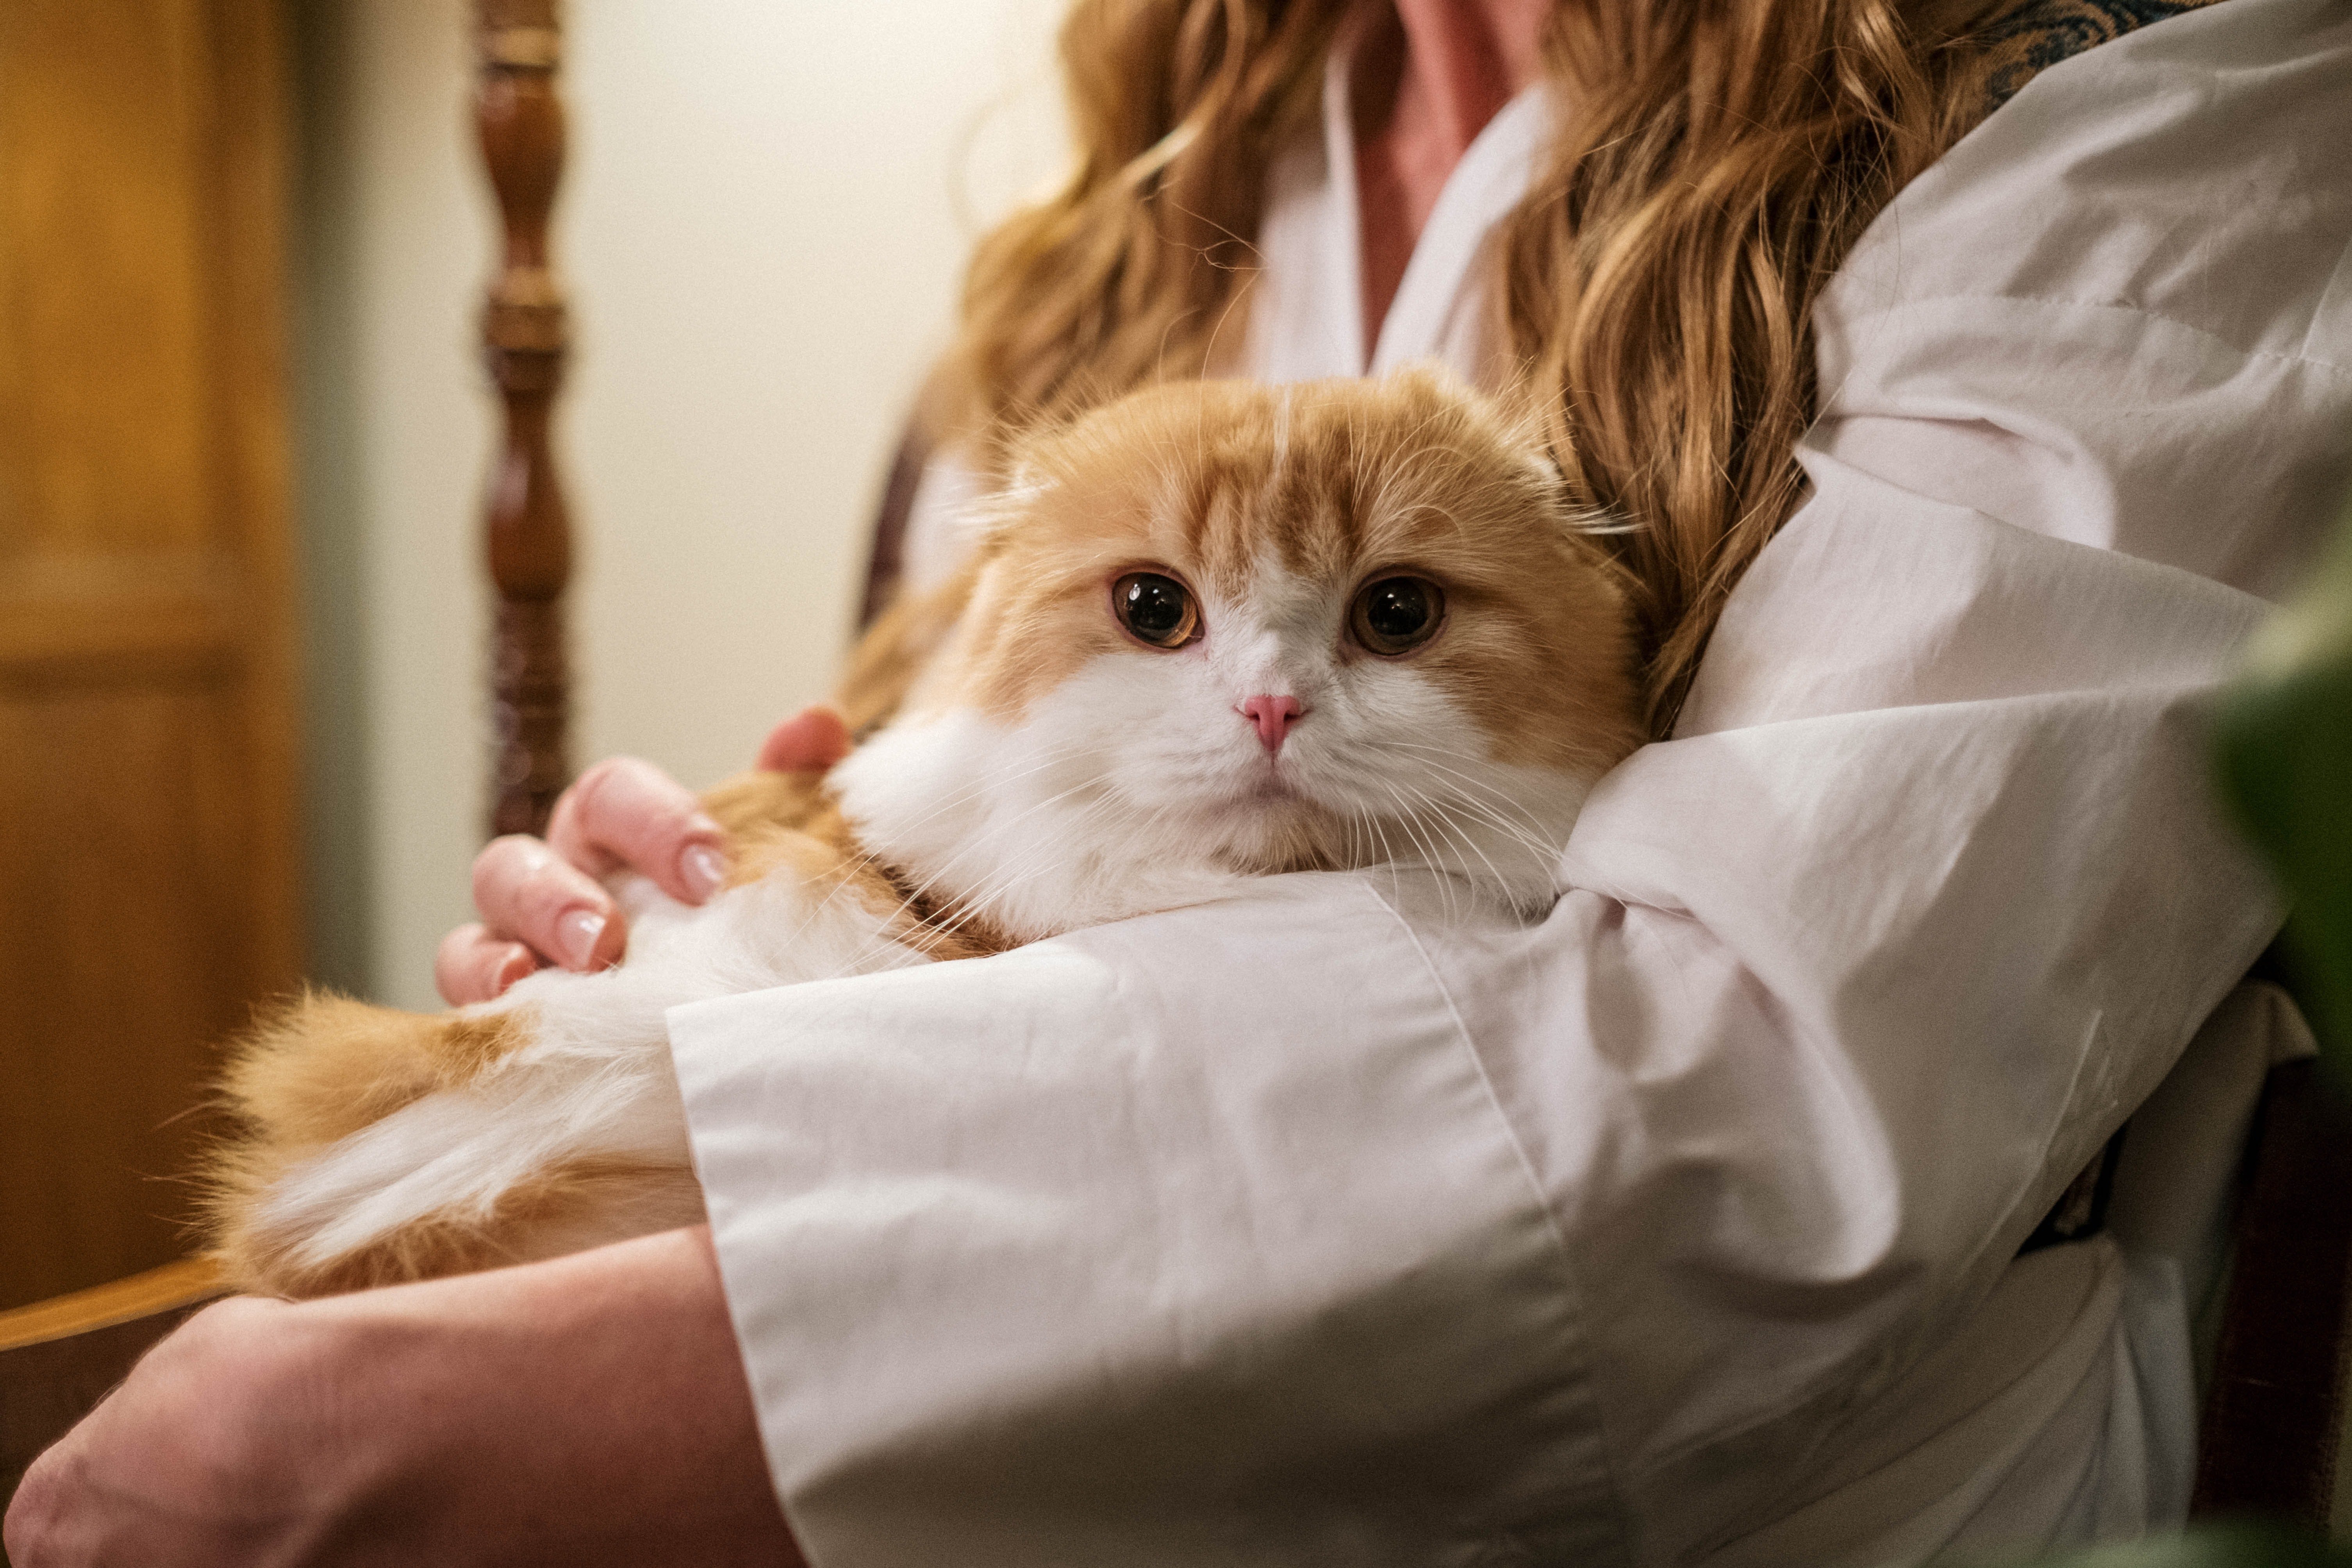 Cat sitting on its person's lap | Photo: Pexels